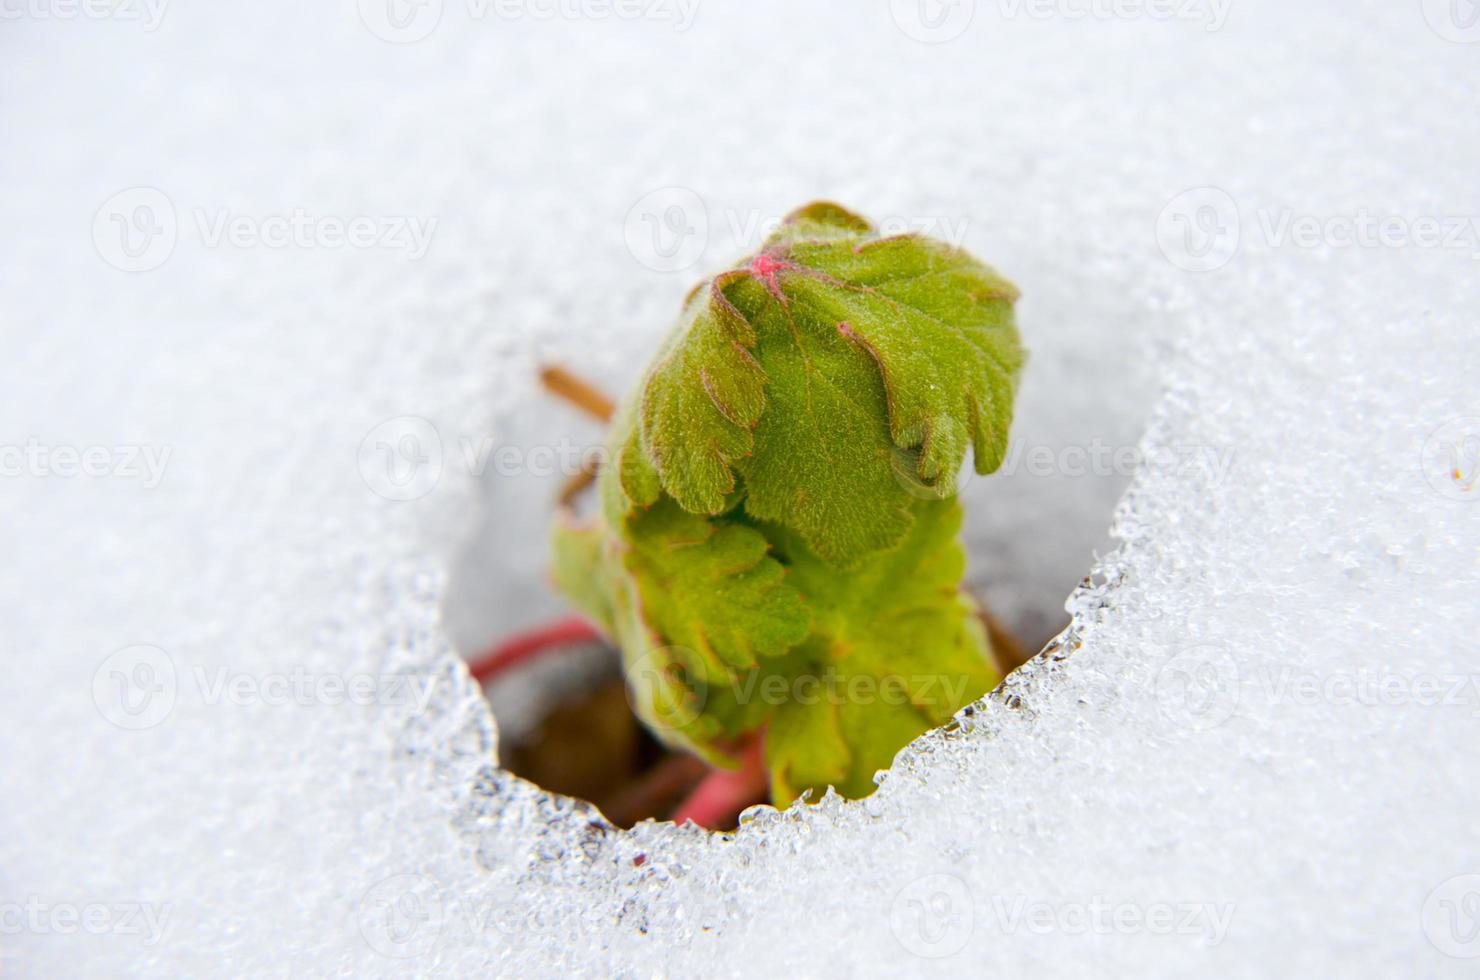 Image of early sprout appearing from melting snowcover photo